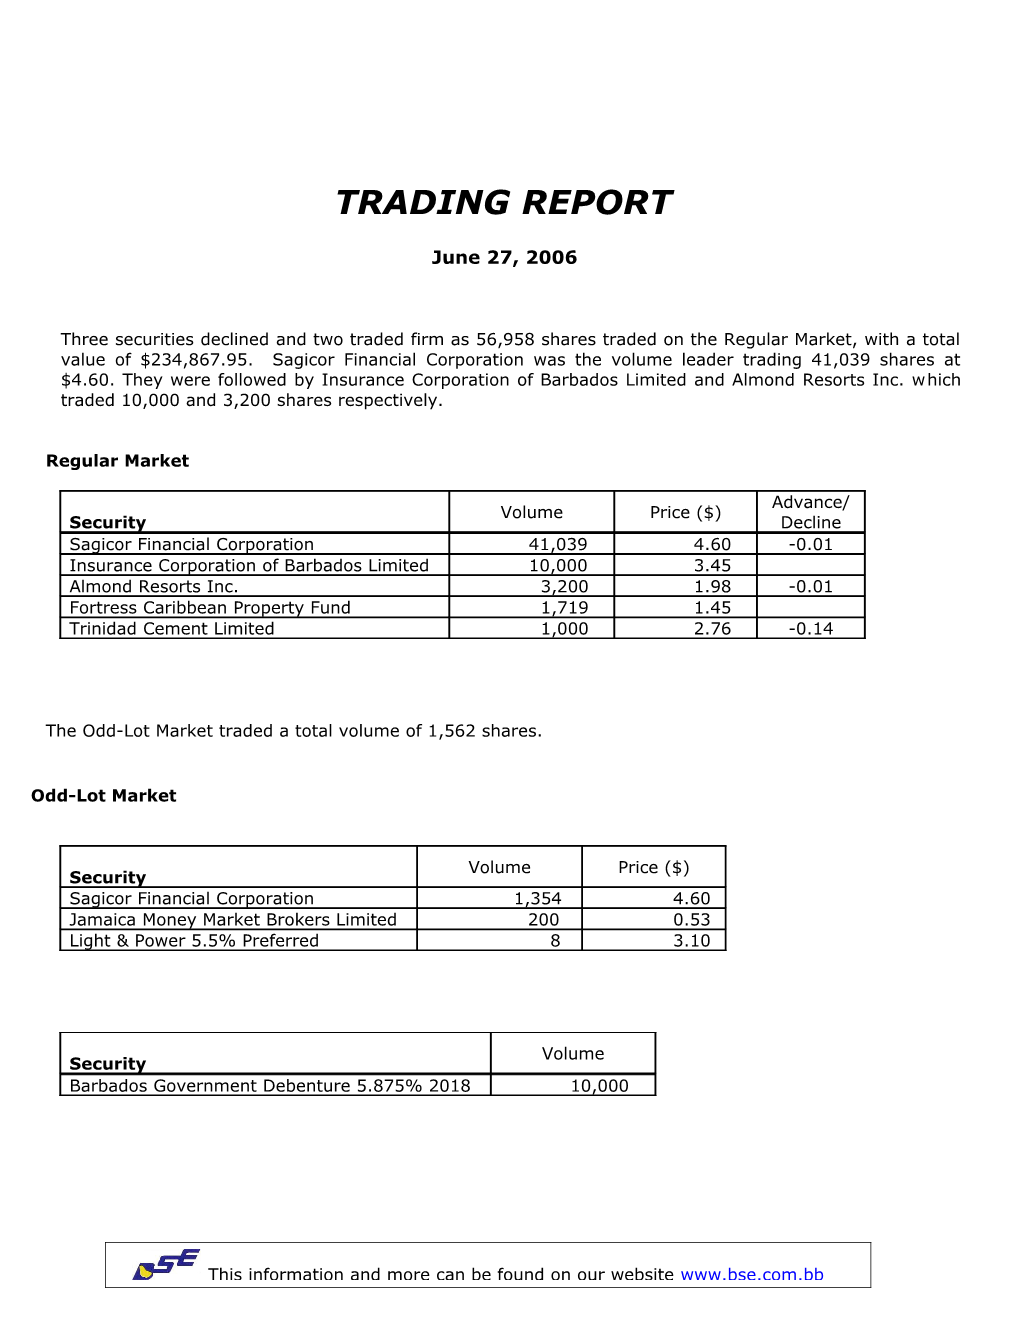 The Odd-Lot Market Traded a Total Volume of 1,562 Shares